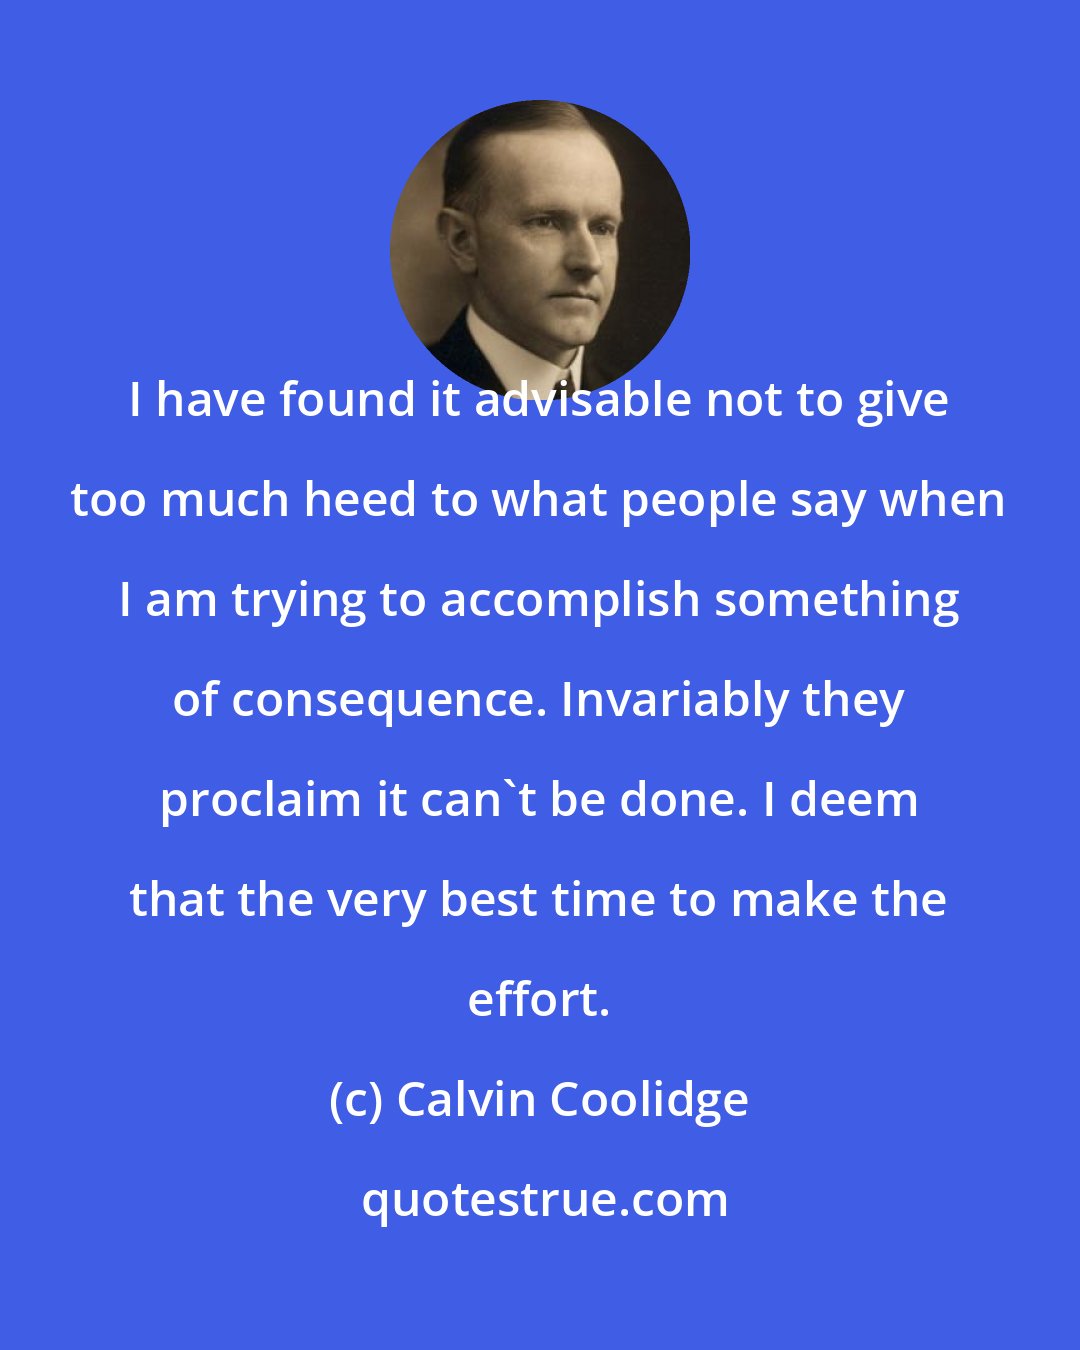 Calvin Coolidge: I have found it advisable not to give too much heed to what people say when I am trying to accomplish something of consequence. Invariably they proclaim it can't be done. I deem that the very best time to make the effort.